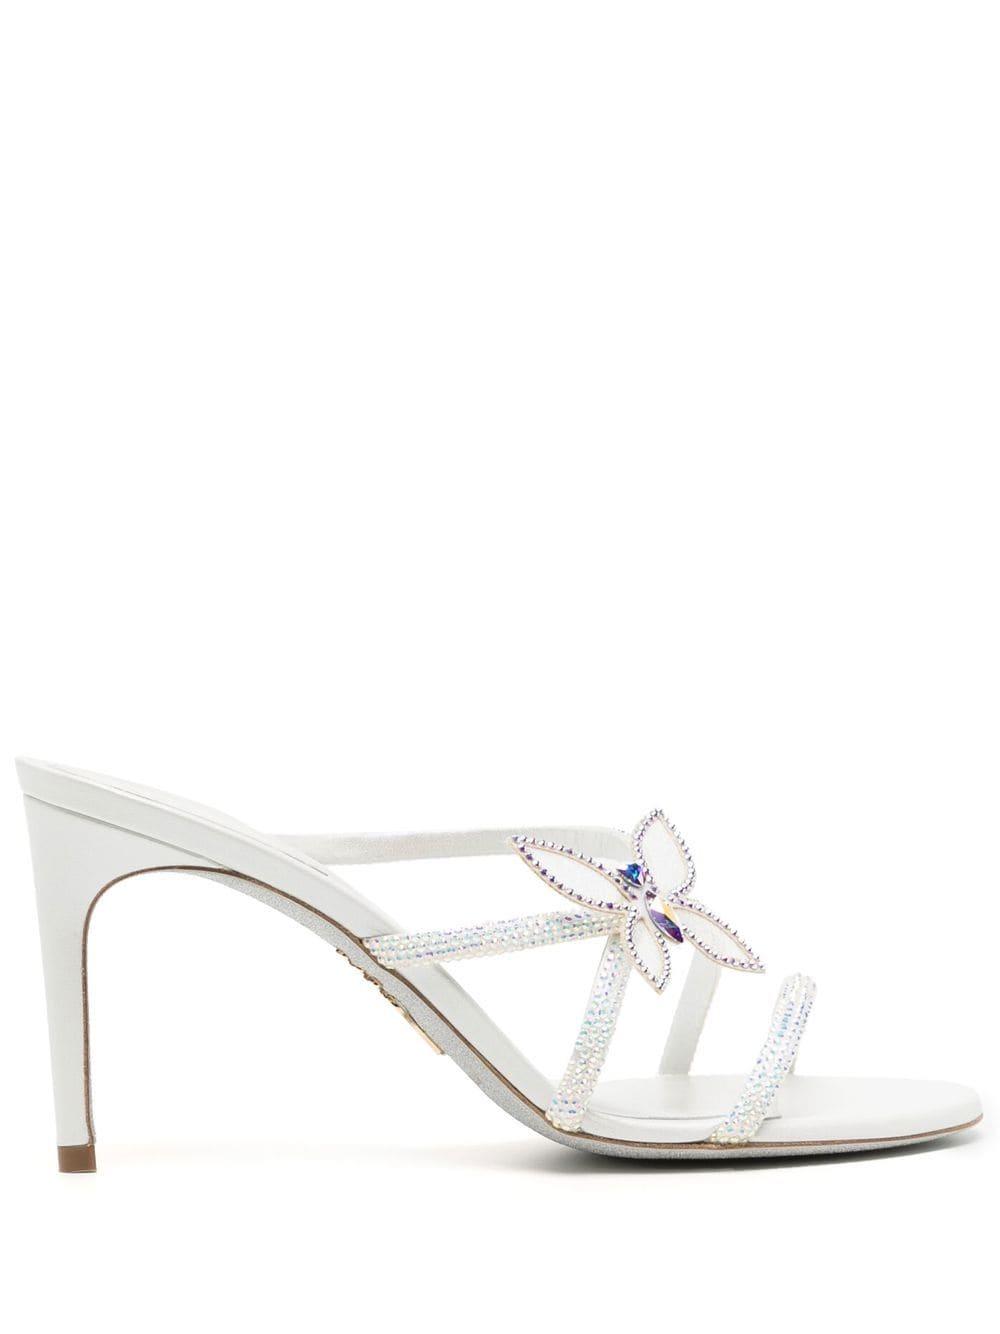 Rene Caovilla Butterfly Embellished Strappy Sandals in White | Lyst